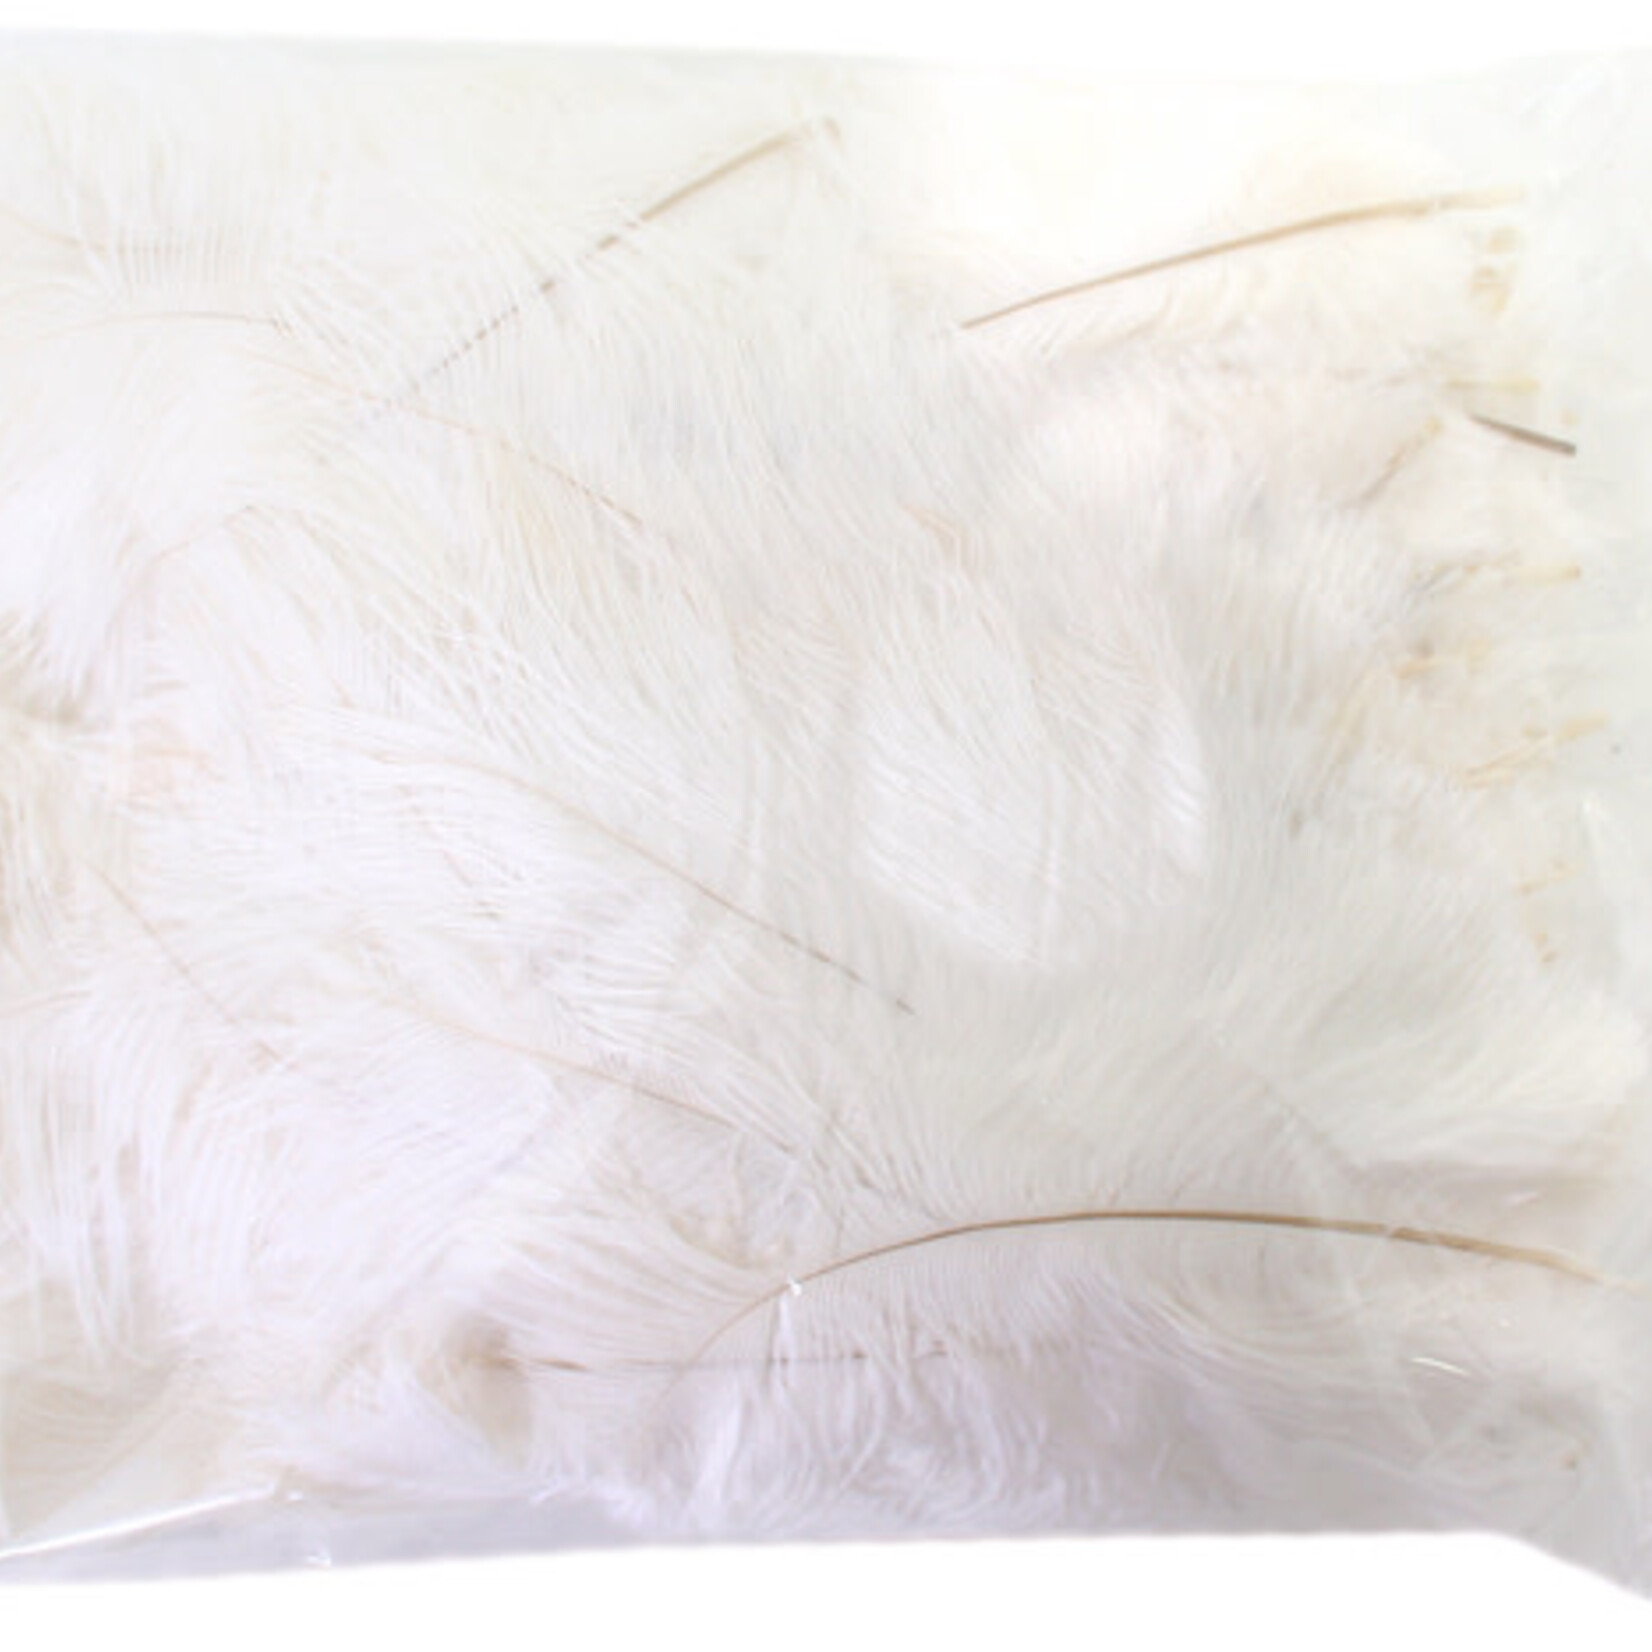 O.D Plumes 6-8 Inch (100 grams) White